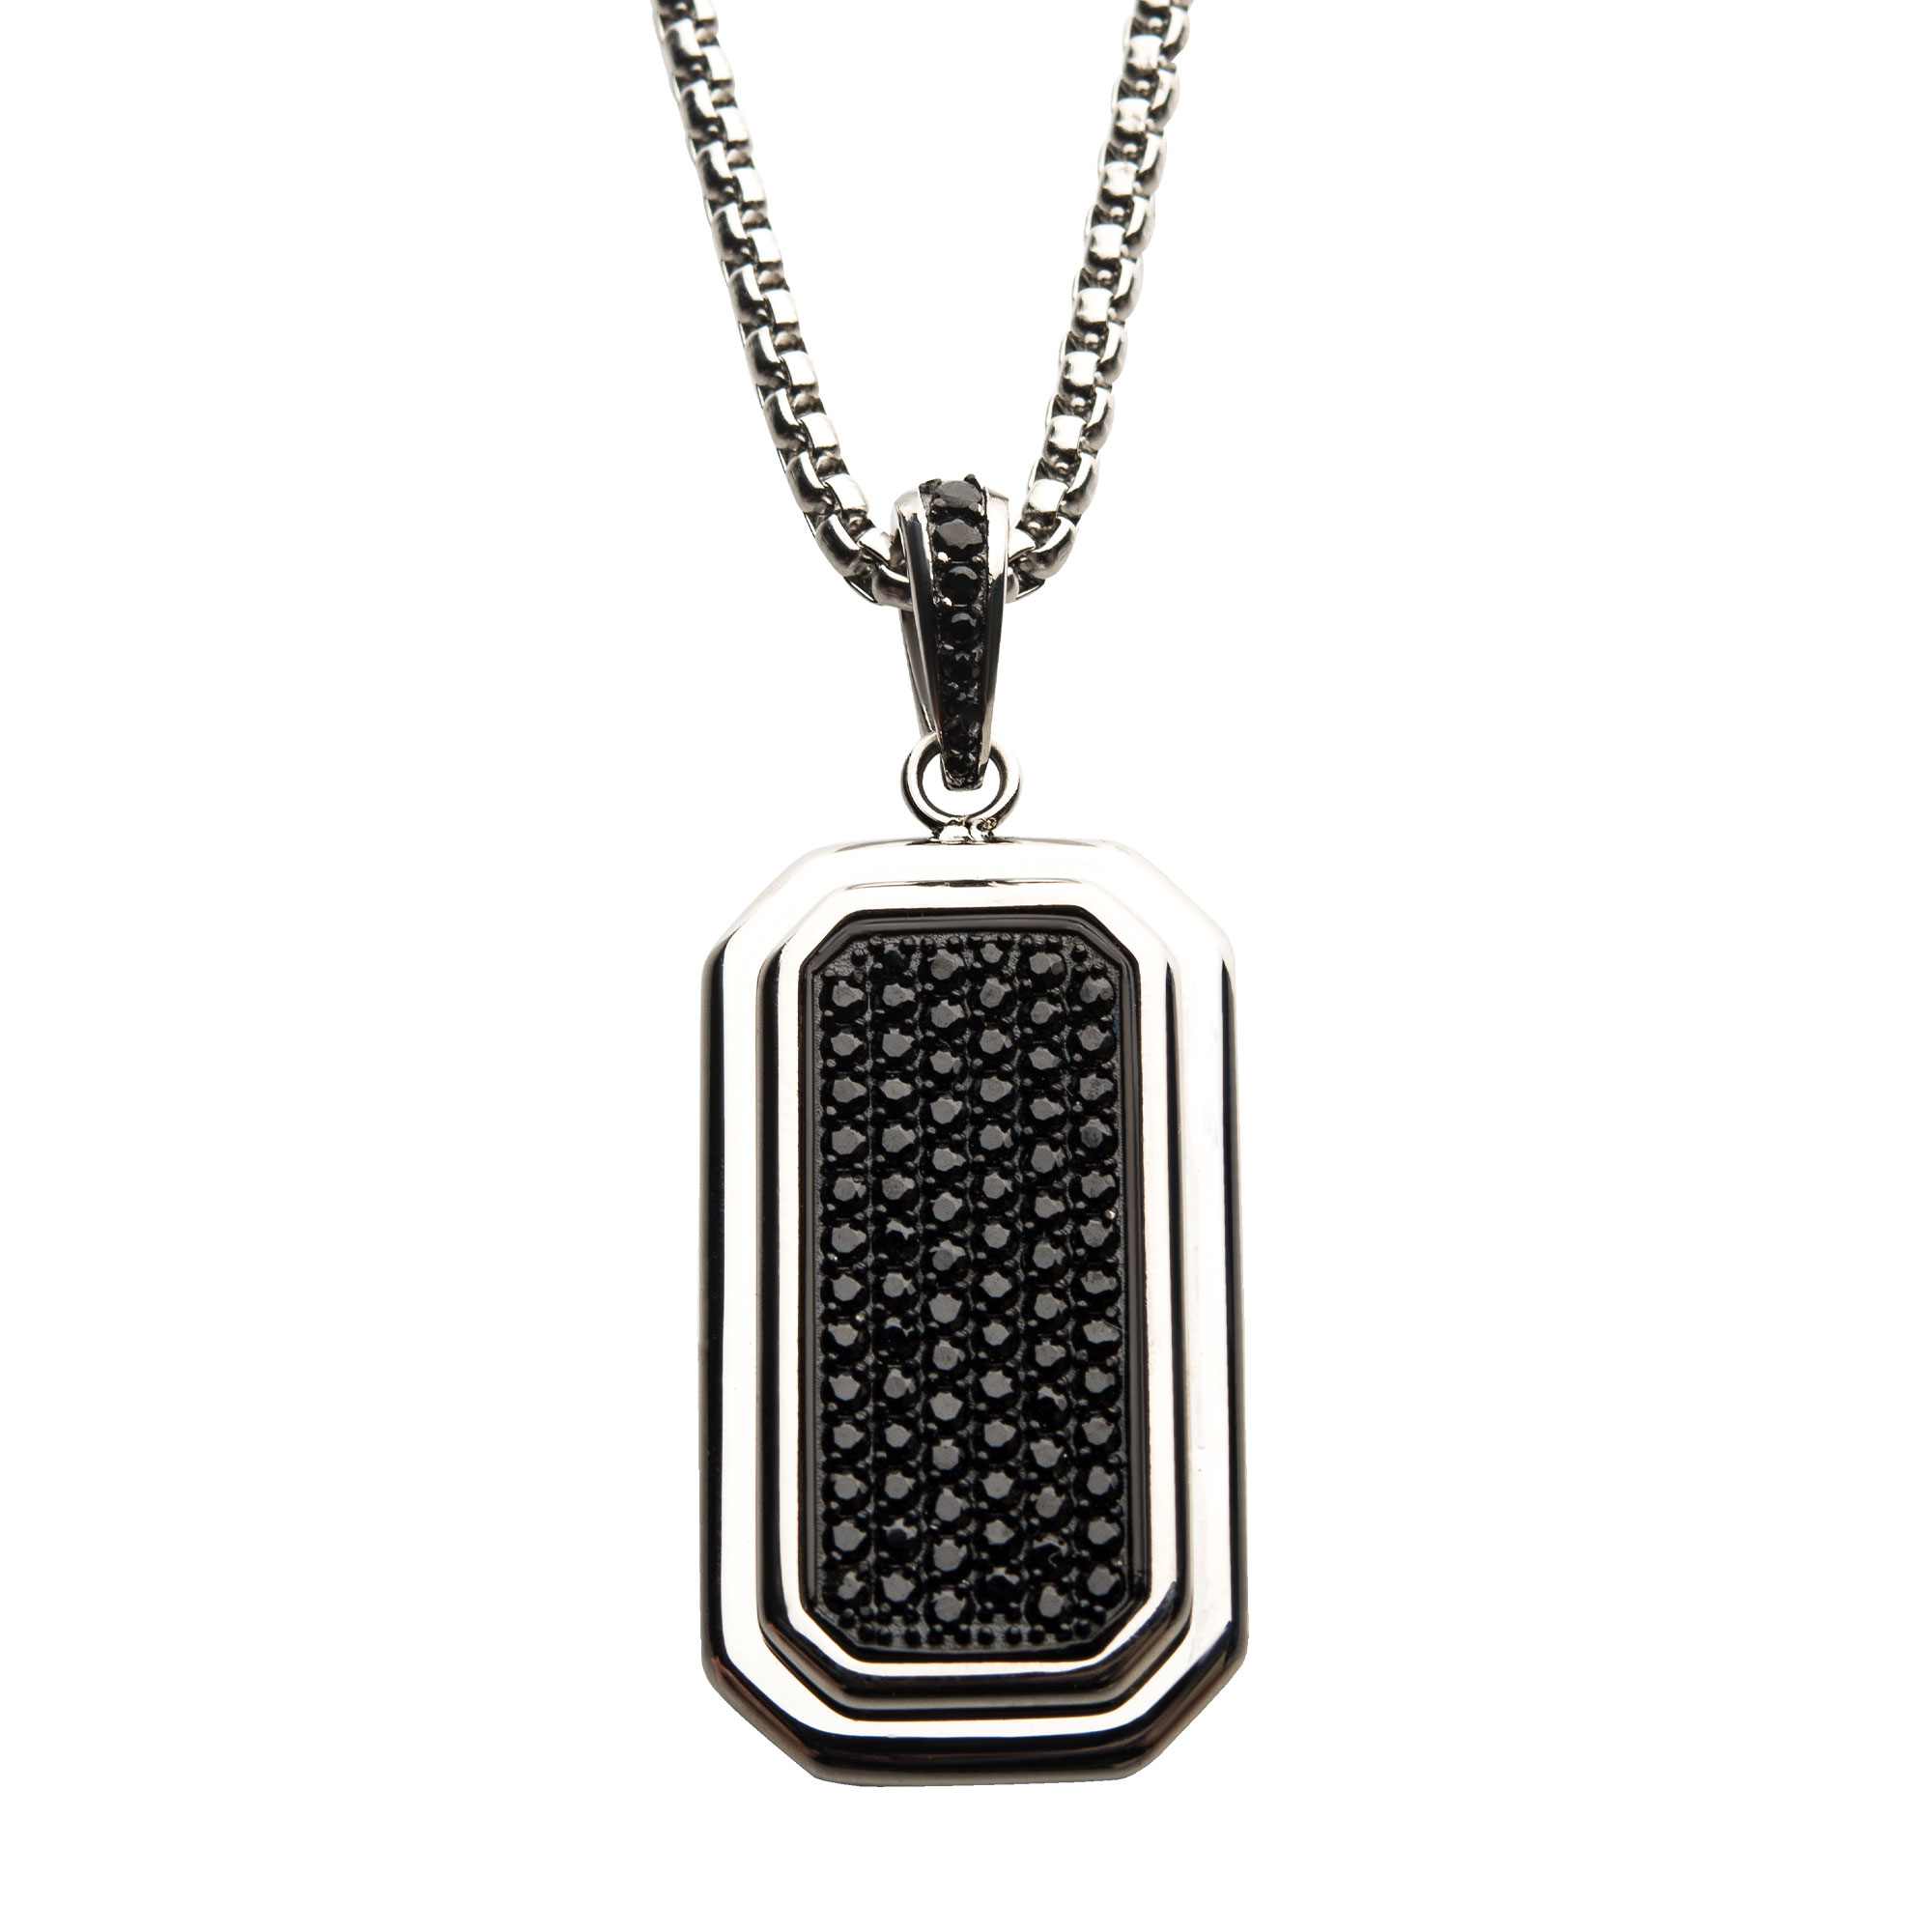 Stainless Steel Dog Tag Pendant with Black CZ Inlay, with Steel Box Chain Ken Walker Jewelers Gig Harbor, WA